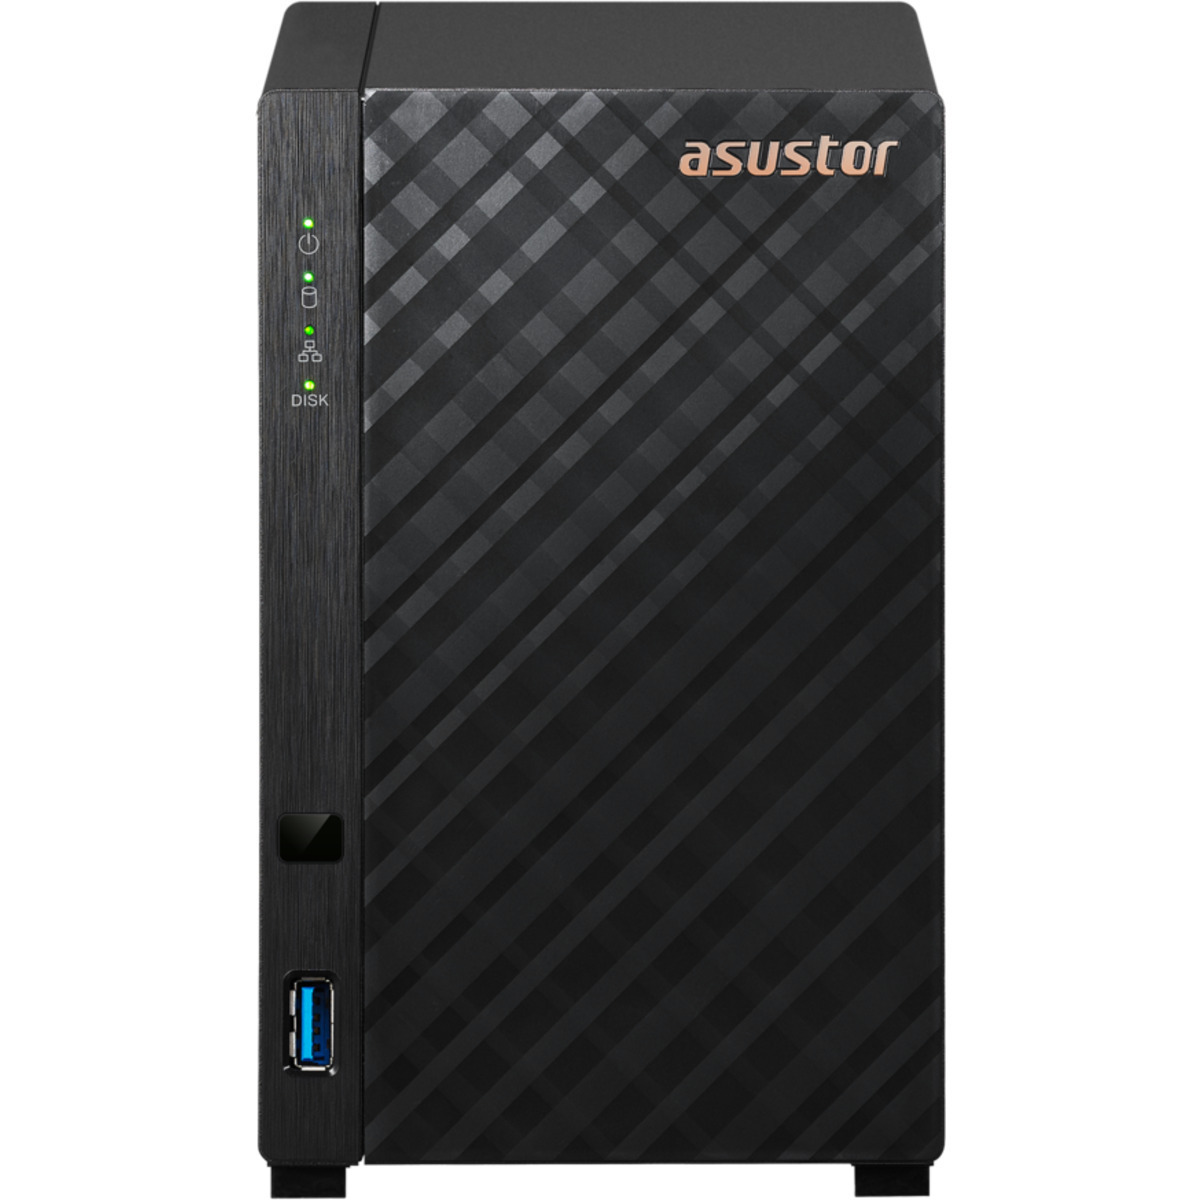 ASUSTOR DRIVESTOR 2 Lite AS1102TL 14tb 2-Bay Desktop Personal / Basic Home / Small Office NAS - Network Attached Storage Device 1x14tb Western Digital Gold WD142KRYZ 3.5 7200rpm SATA 6Gb/s HDD ENTERPRISE Class Drives Installed - Burn-In Tested DRIVESTOR 2 Lite AS1102TL